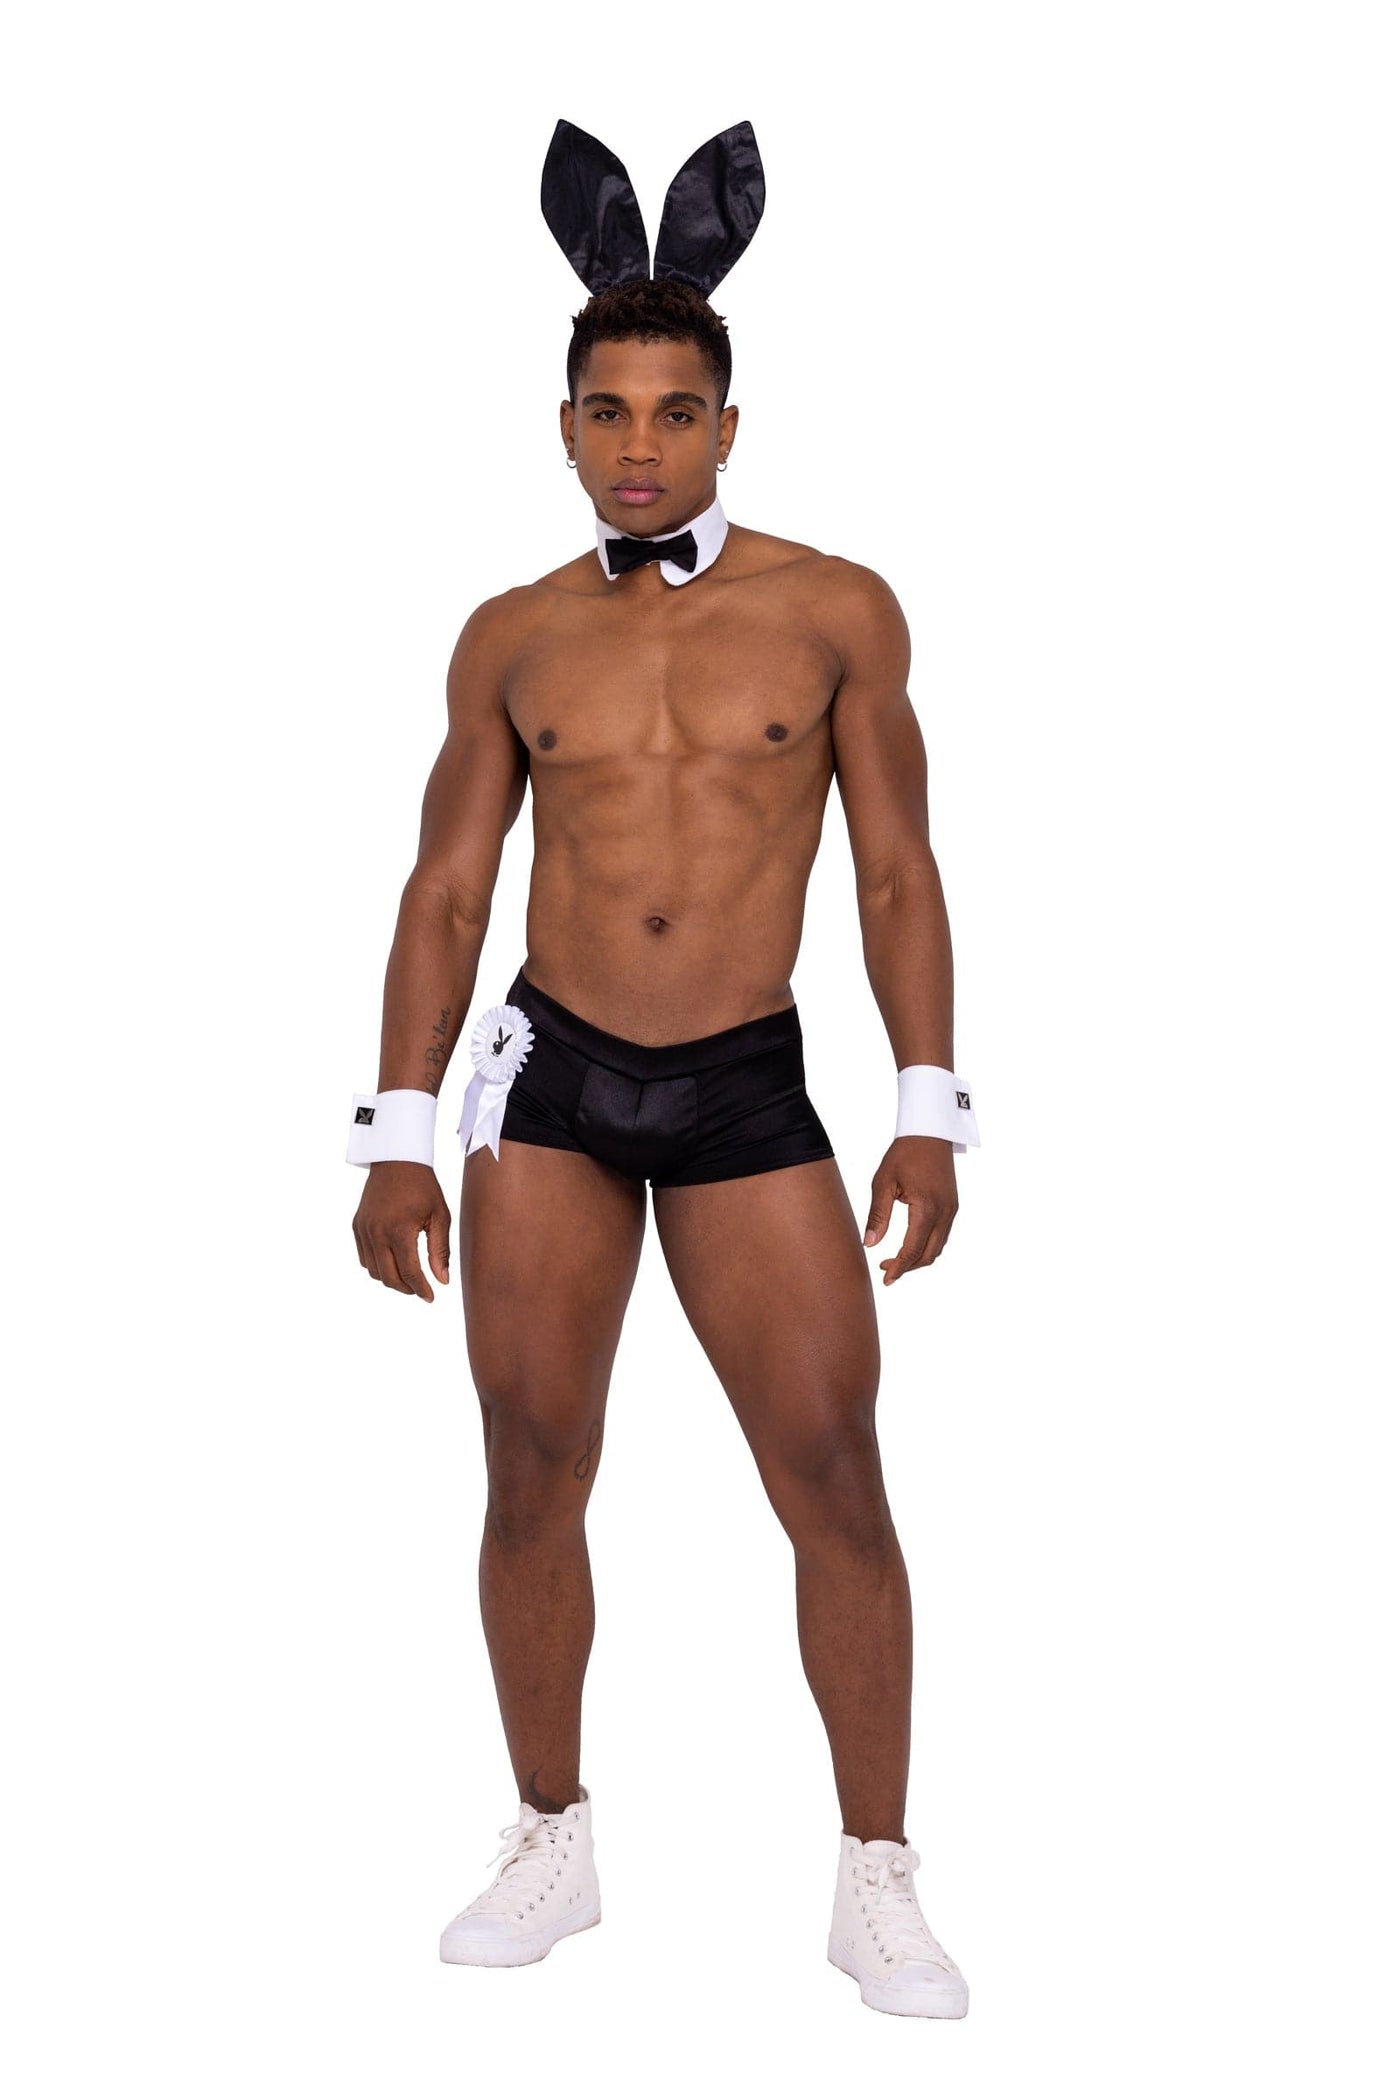 8pc. Official Playboy Bunny Hunky Playmate Men's Costume - For Love of Lingerie